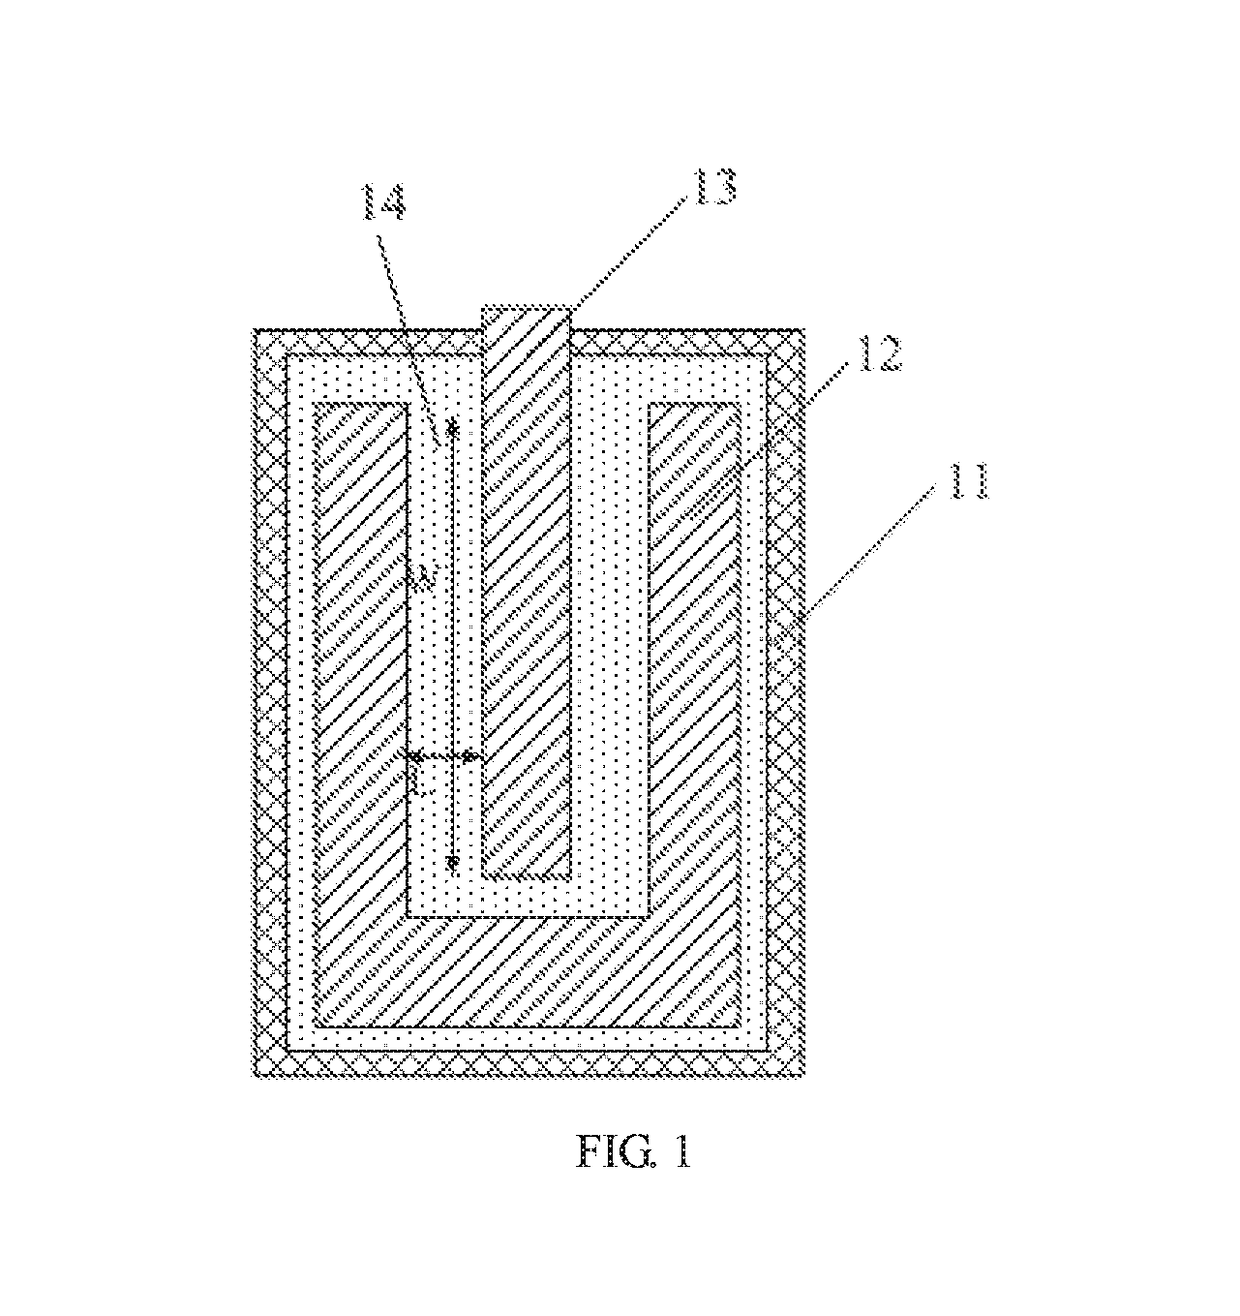 Array substrate and display device